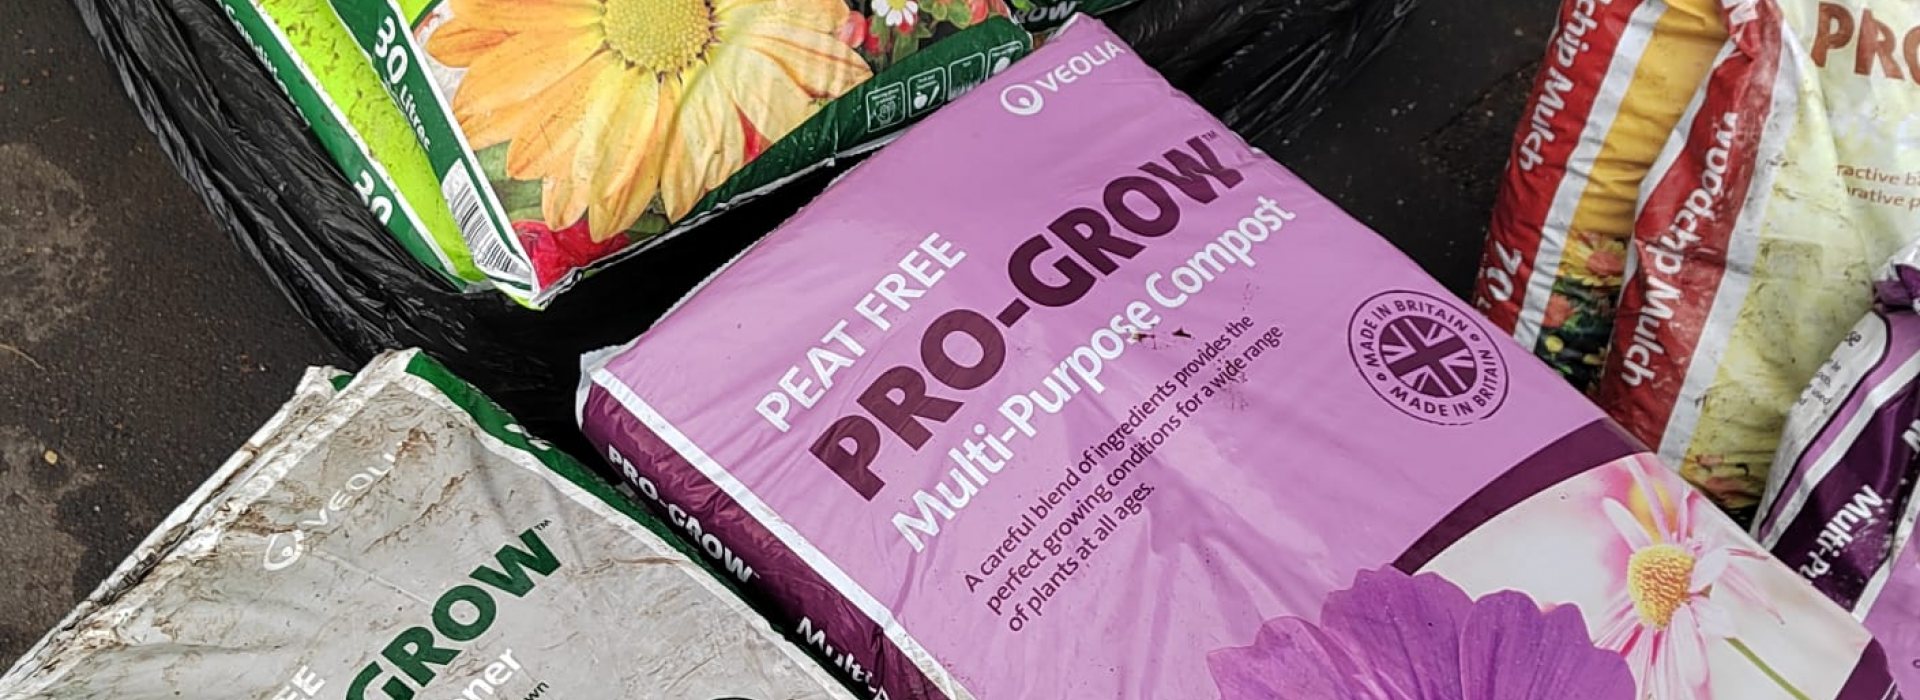 Buy Pro-Grow Small Bags